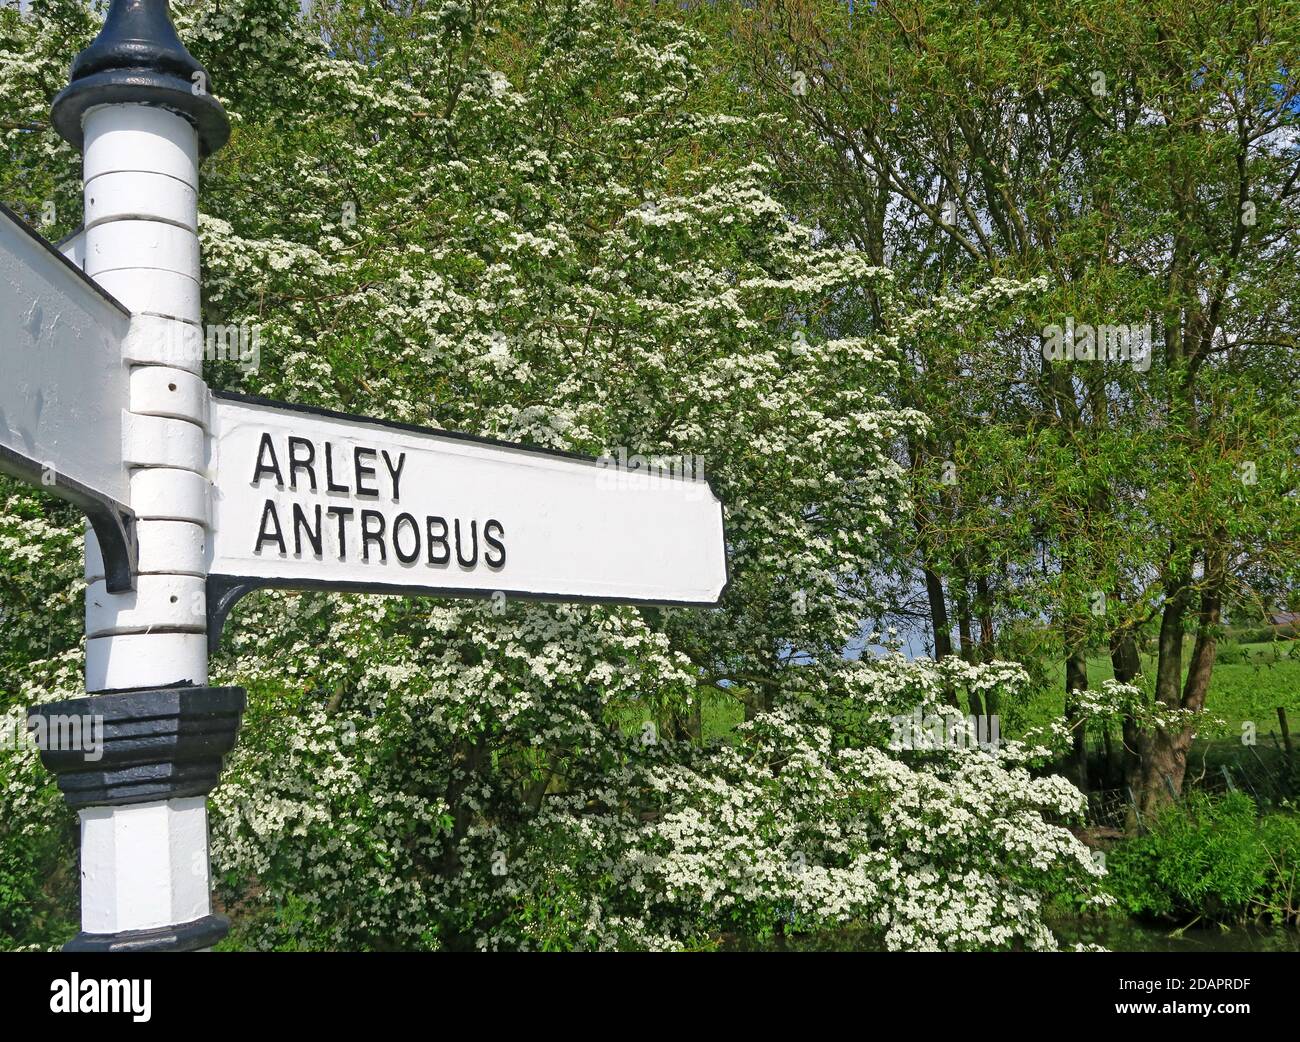 Campagne Fingerpost, Arley, Antrobus,villages,Cheshire,Angleterre,Royaume-Uni Banque D'Images